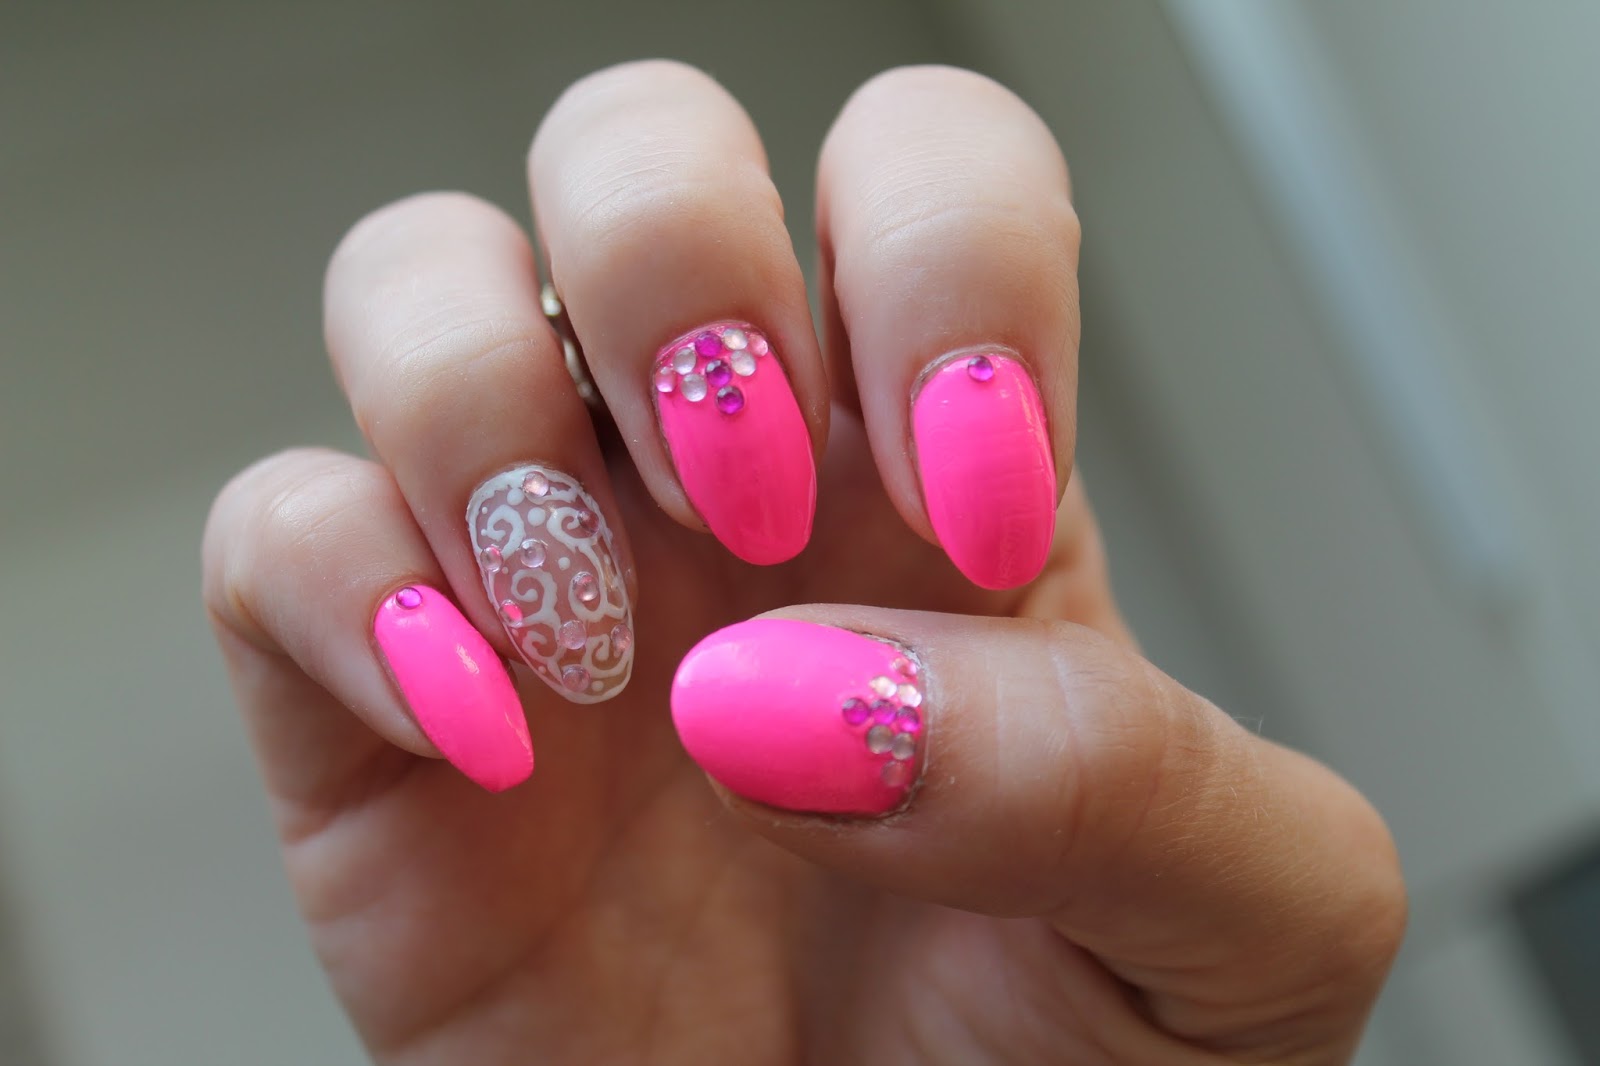 3. Lace Nail Art Designs for Gel Nails - wide 6